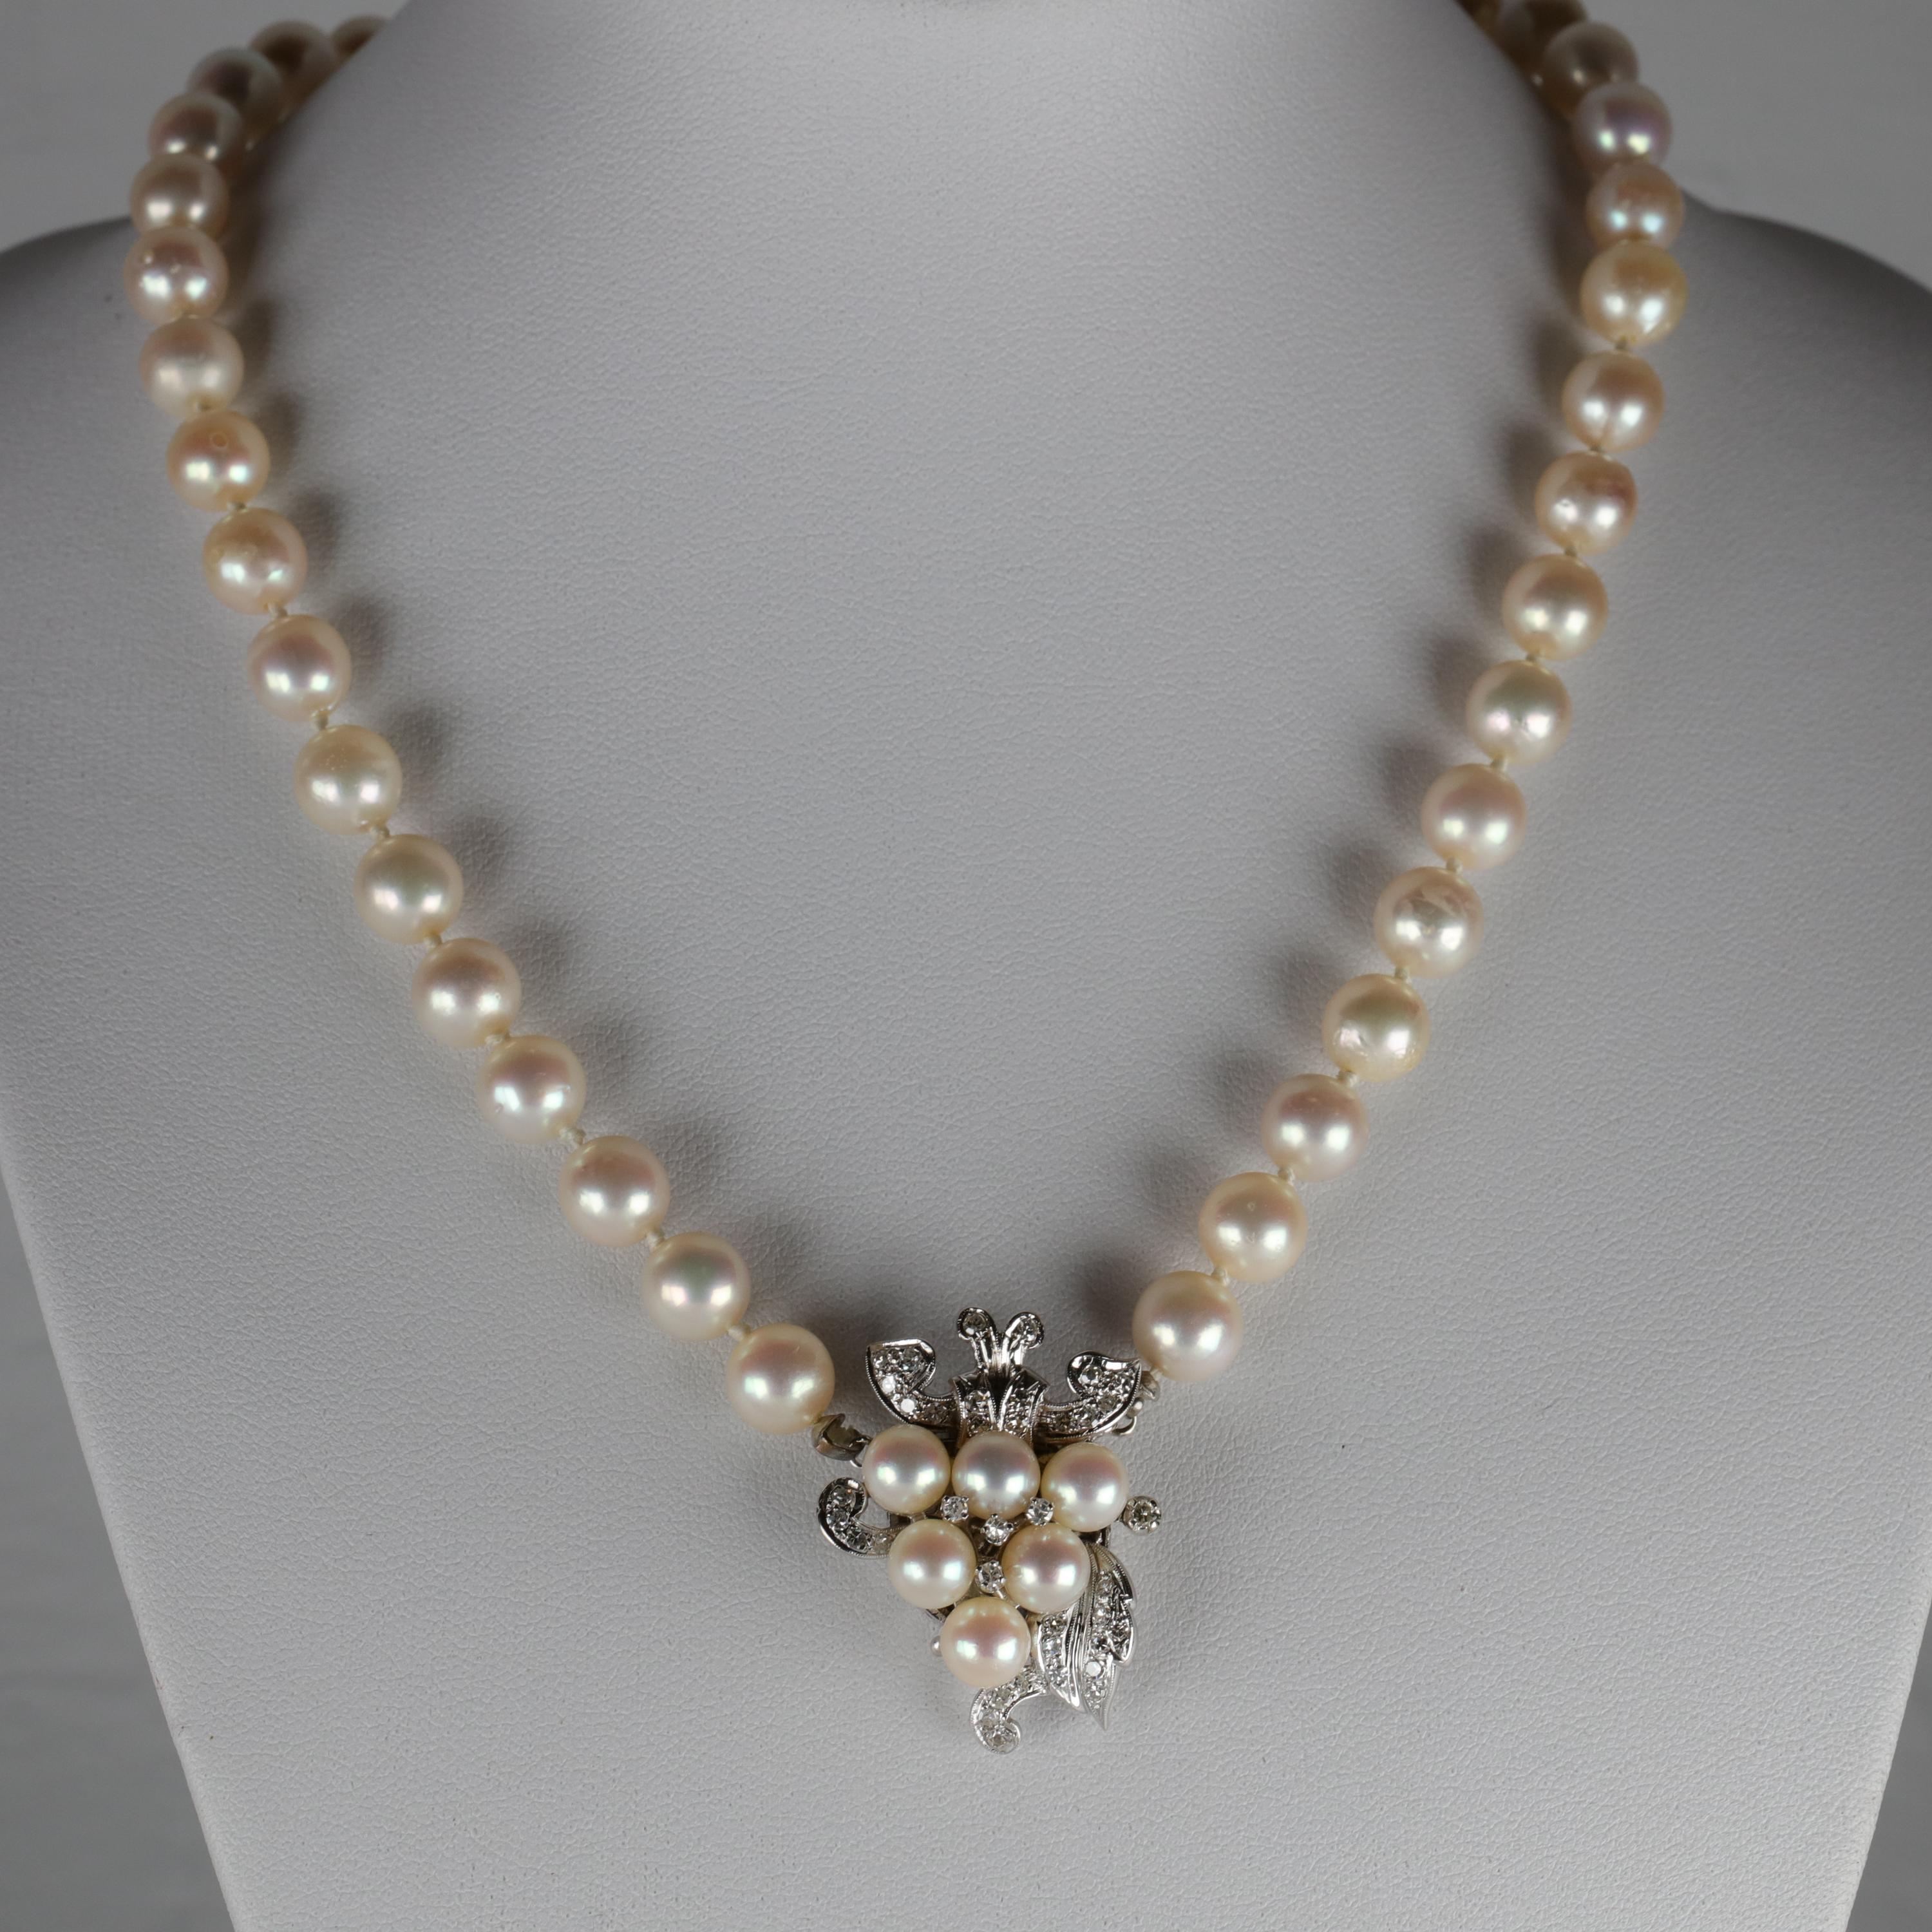 Forty-three (43) cultured saltwater Akoya pearls measuring between 8mm - 8.5mm comprise this 16.5